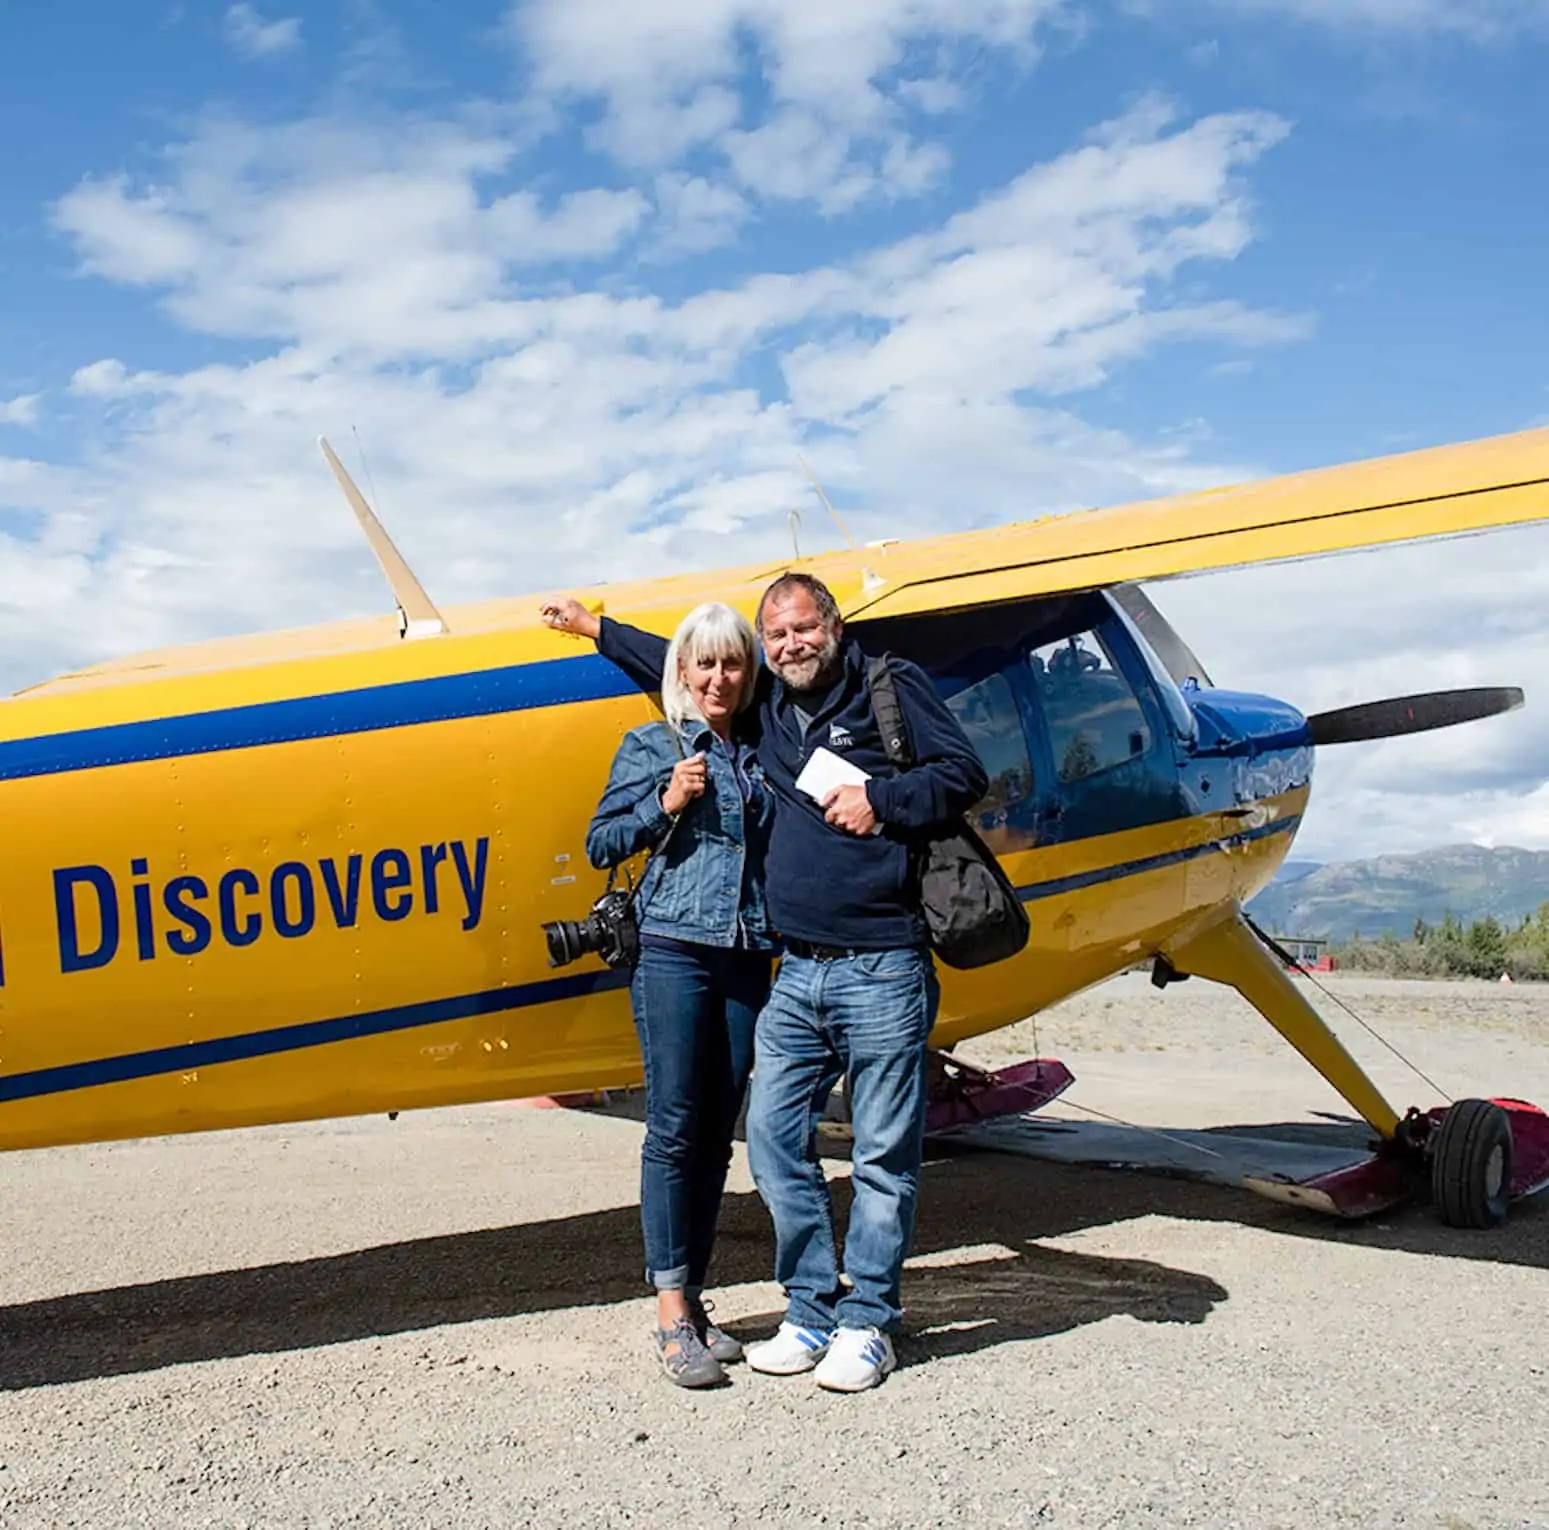 Mark Stevens and Sharon Matthews-Stevens in front of a yellow airplane.